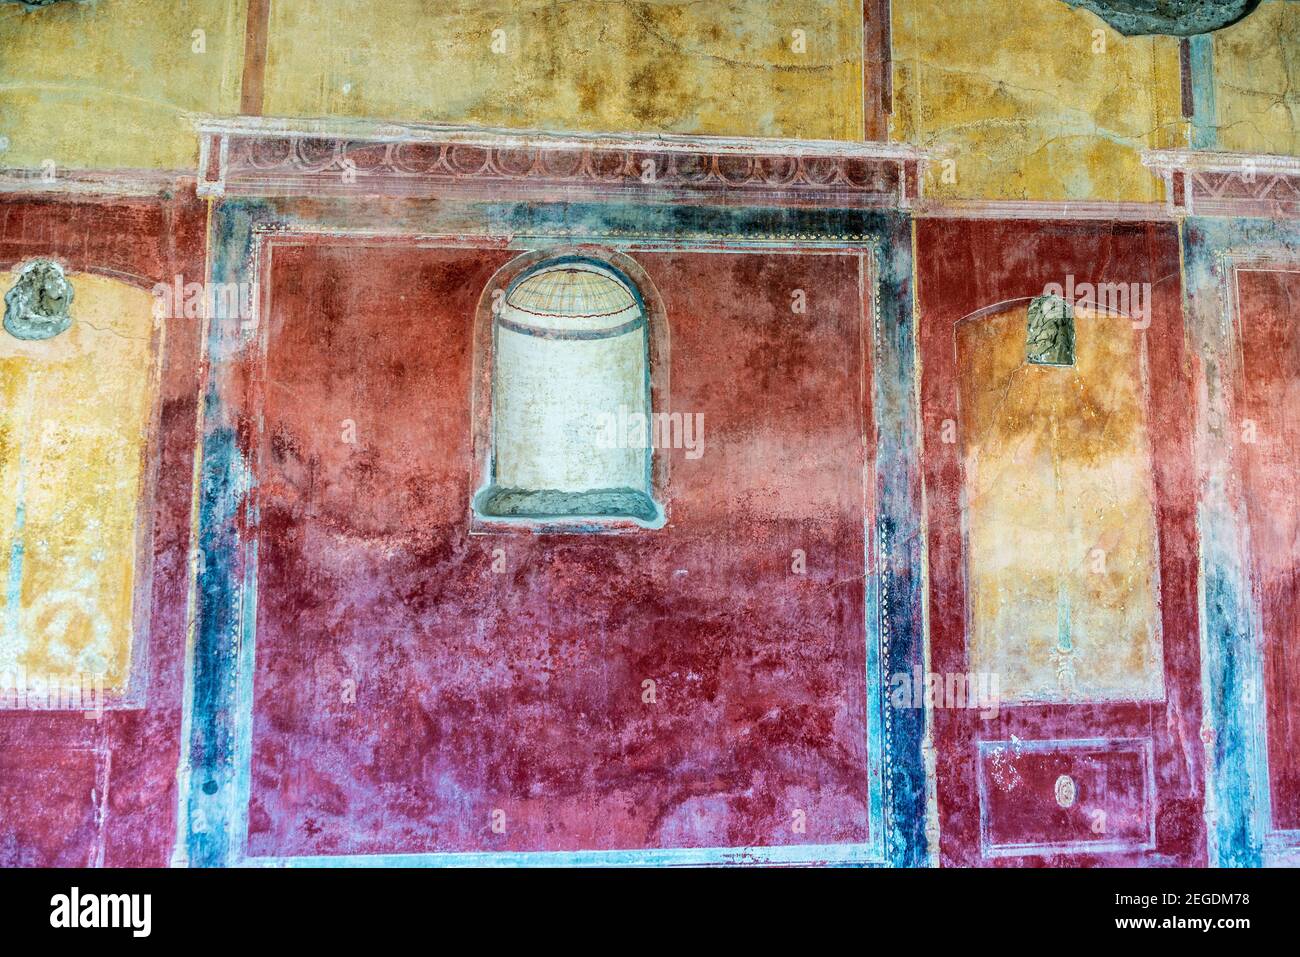 Altar in a house in the ruins of the ancient archaeological site of Pompeii, Italy Stock Photo